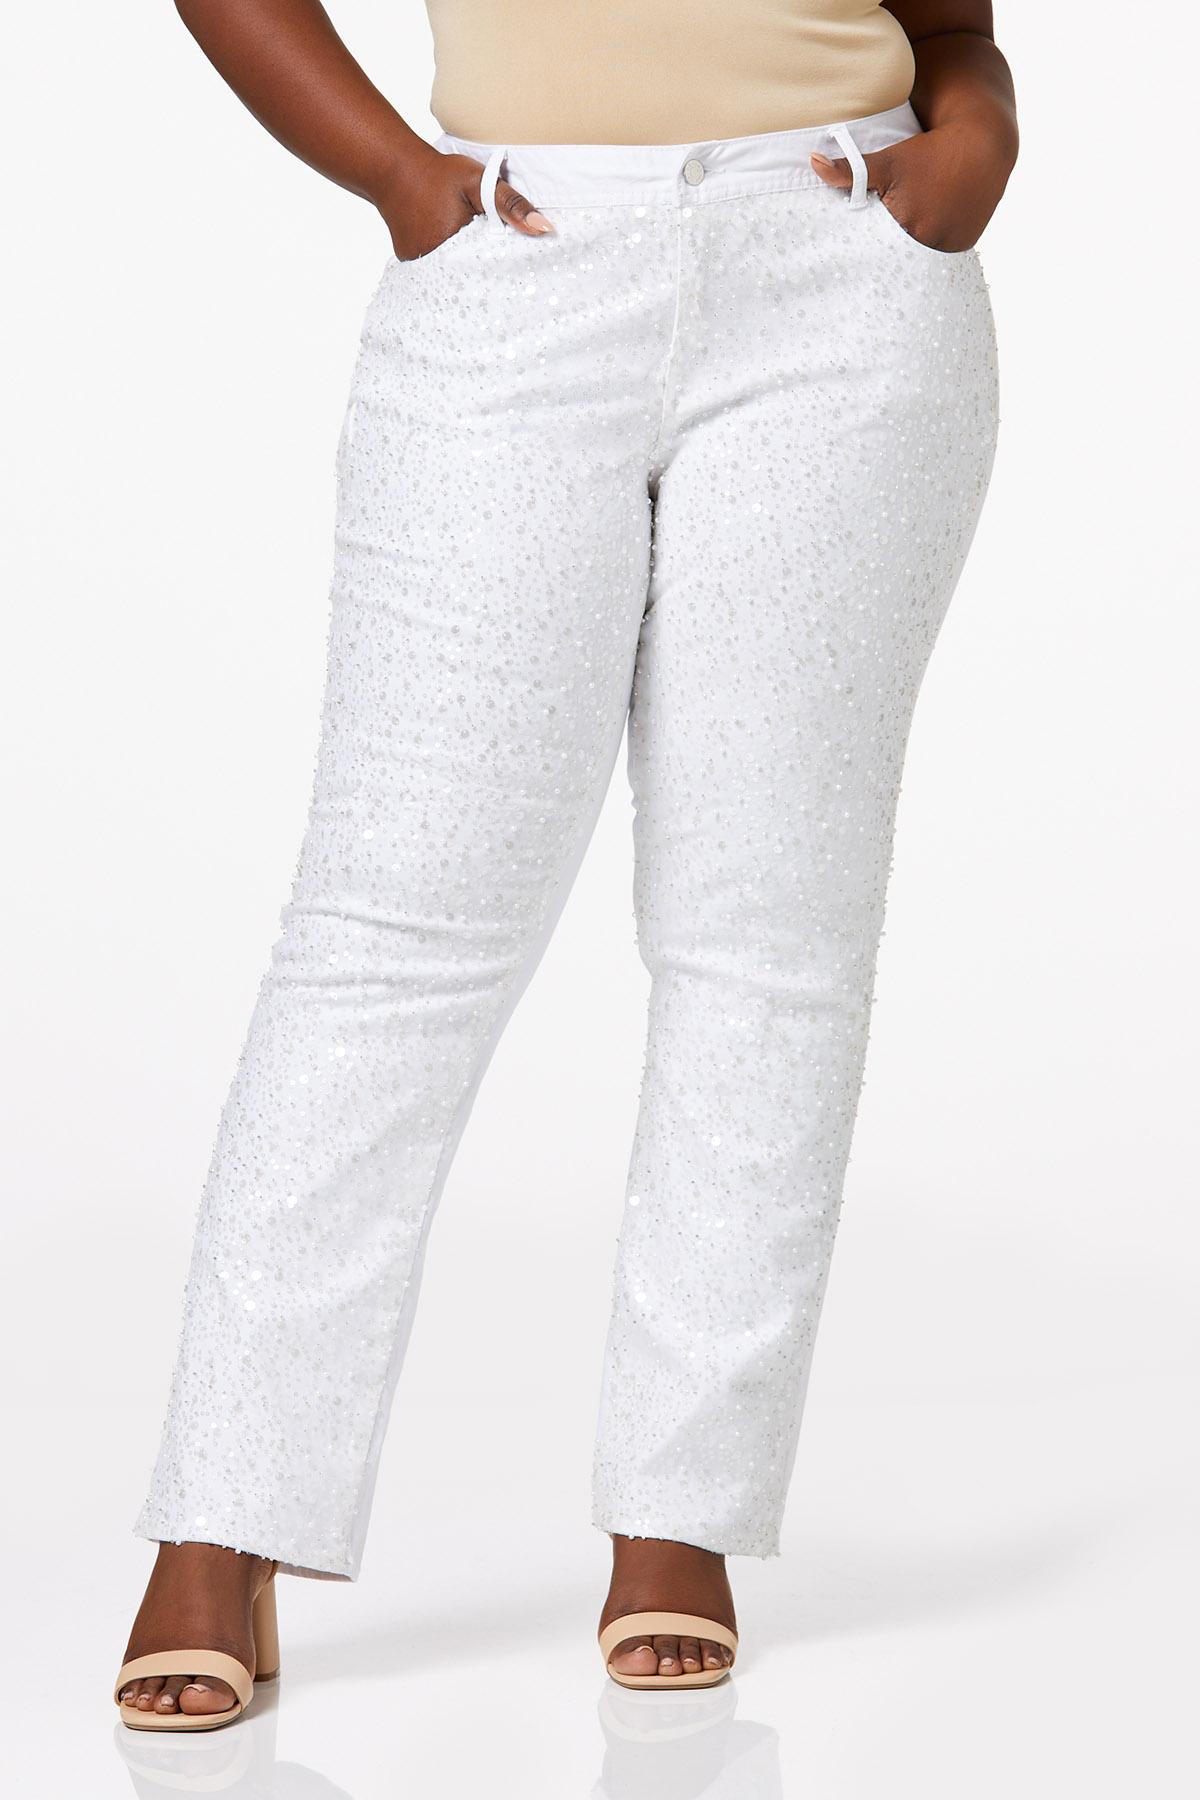 Cato Fashions  Cato Plus Size Embellished Bootcut Jeans